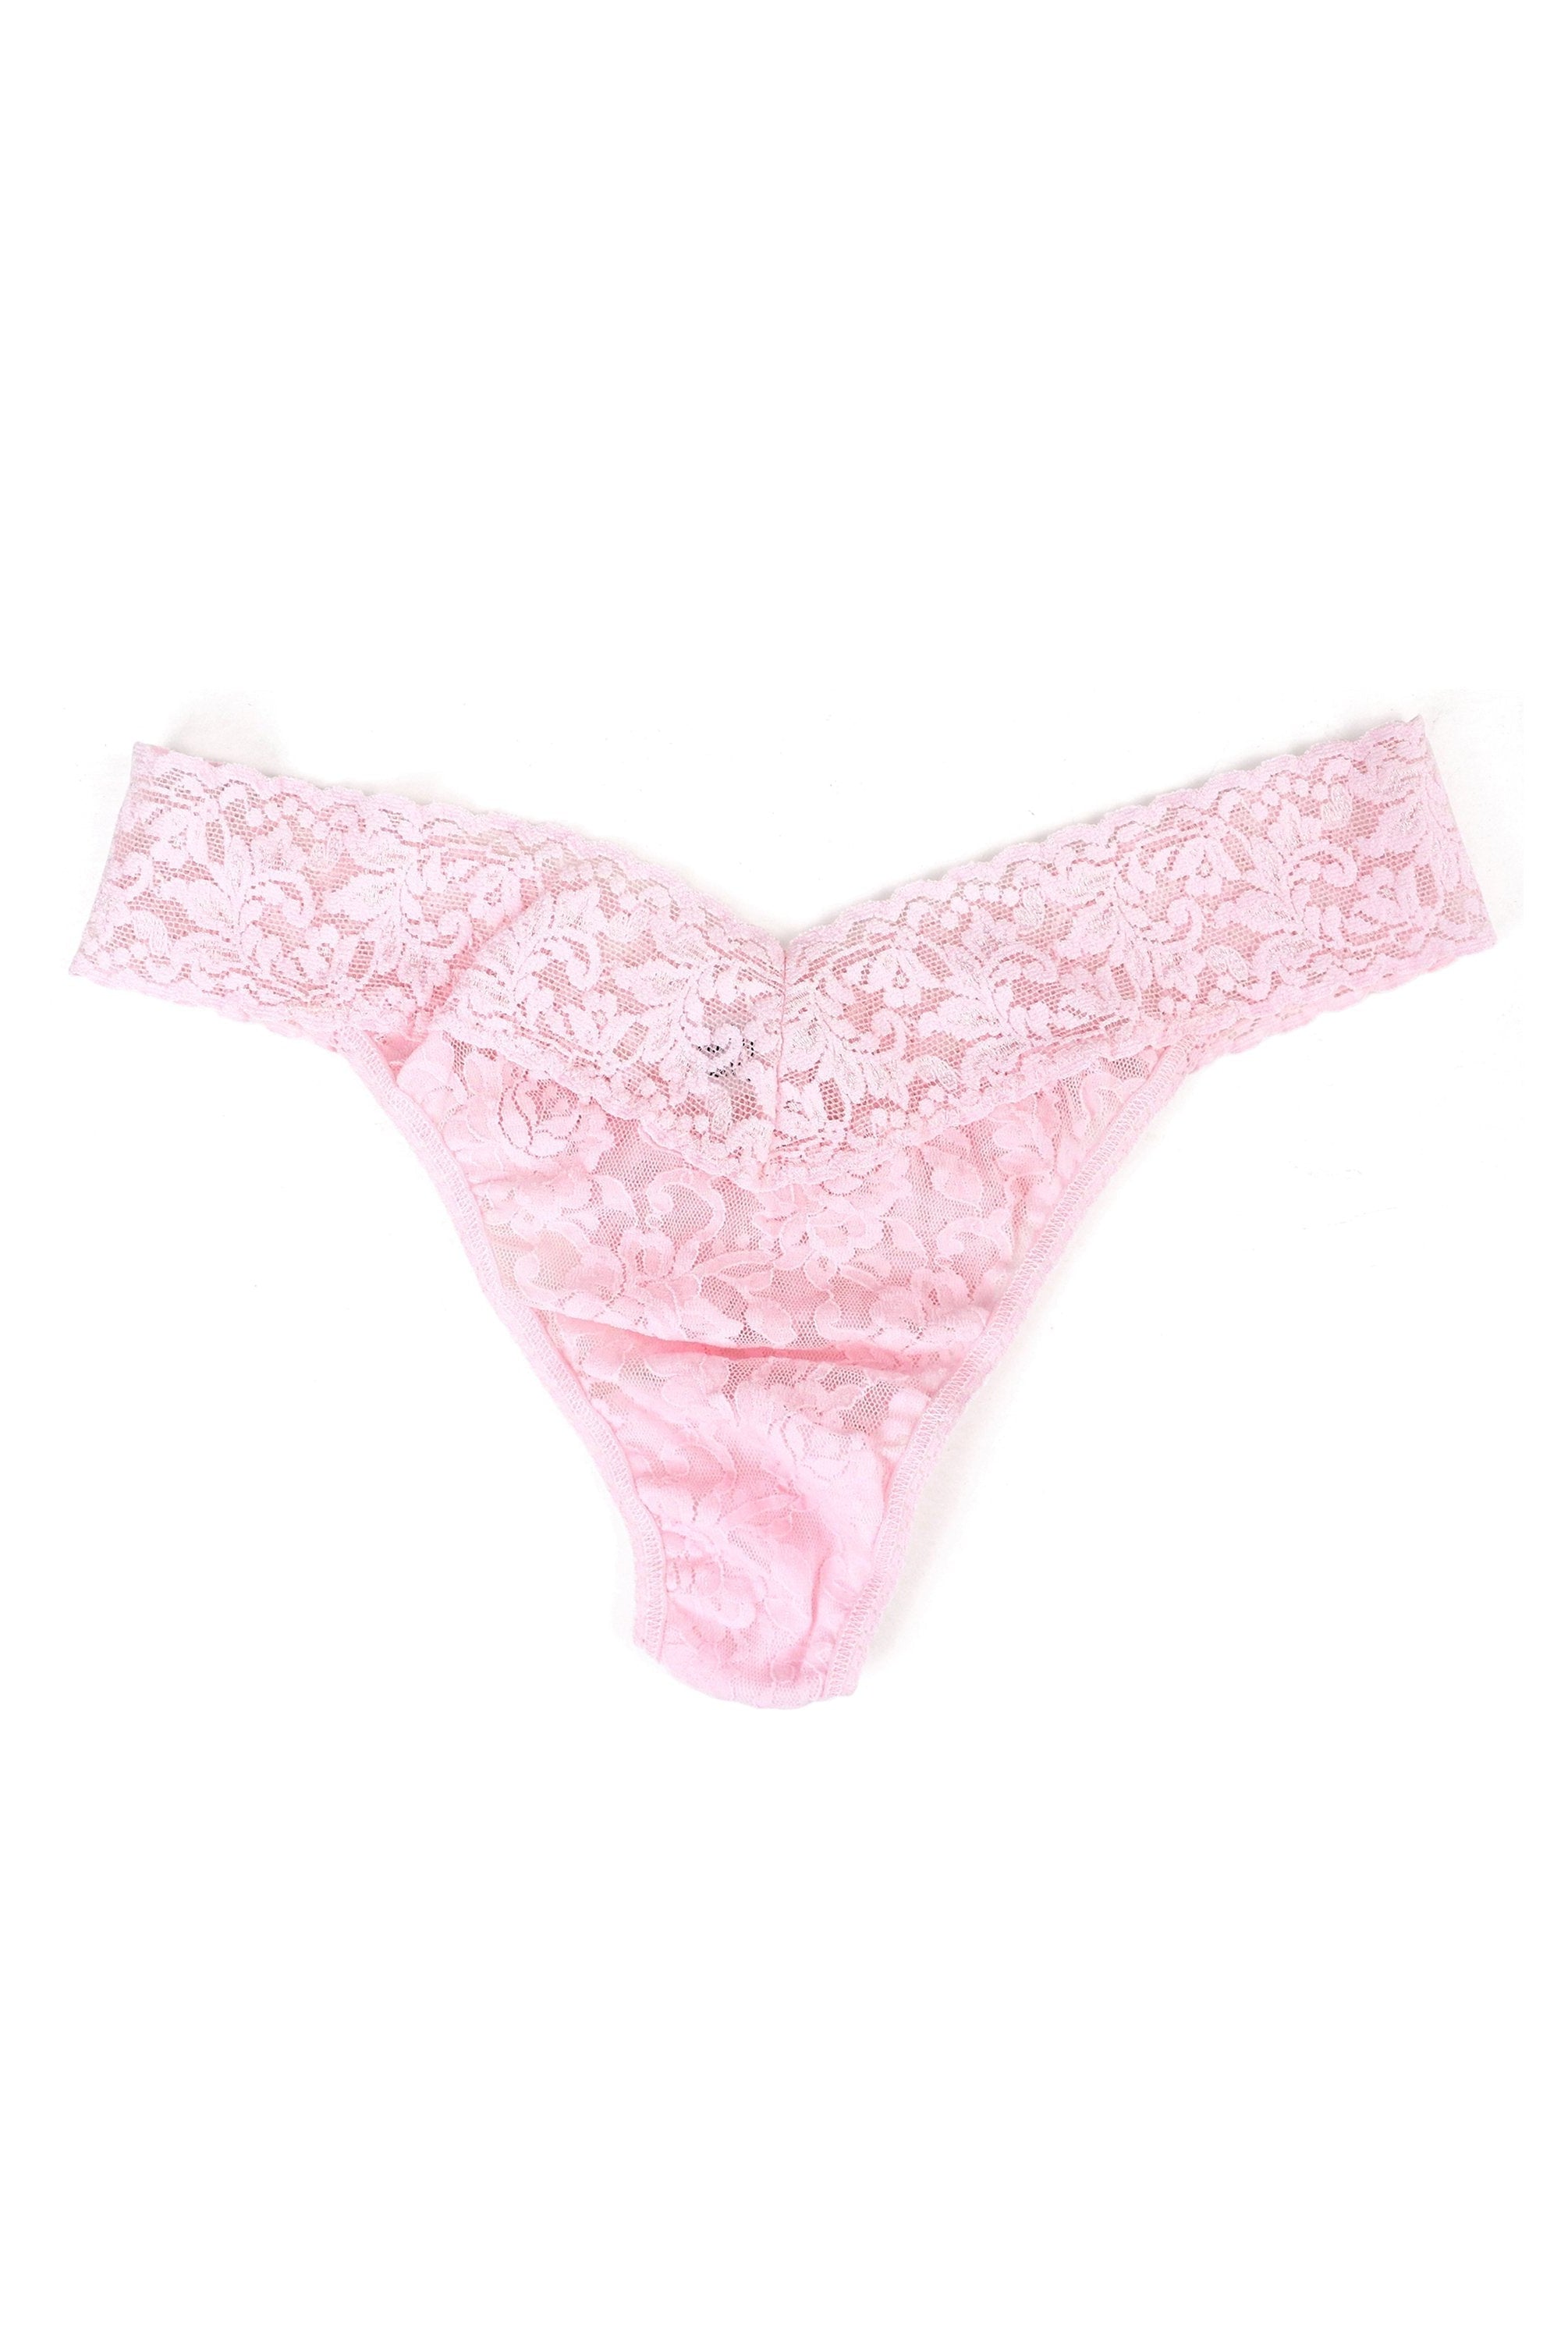 Top Lingerie Shops in Seattle: Where to Find the Best Underwear